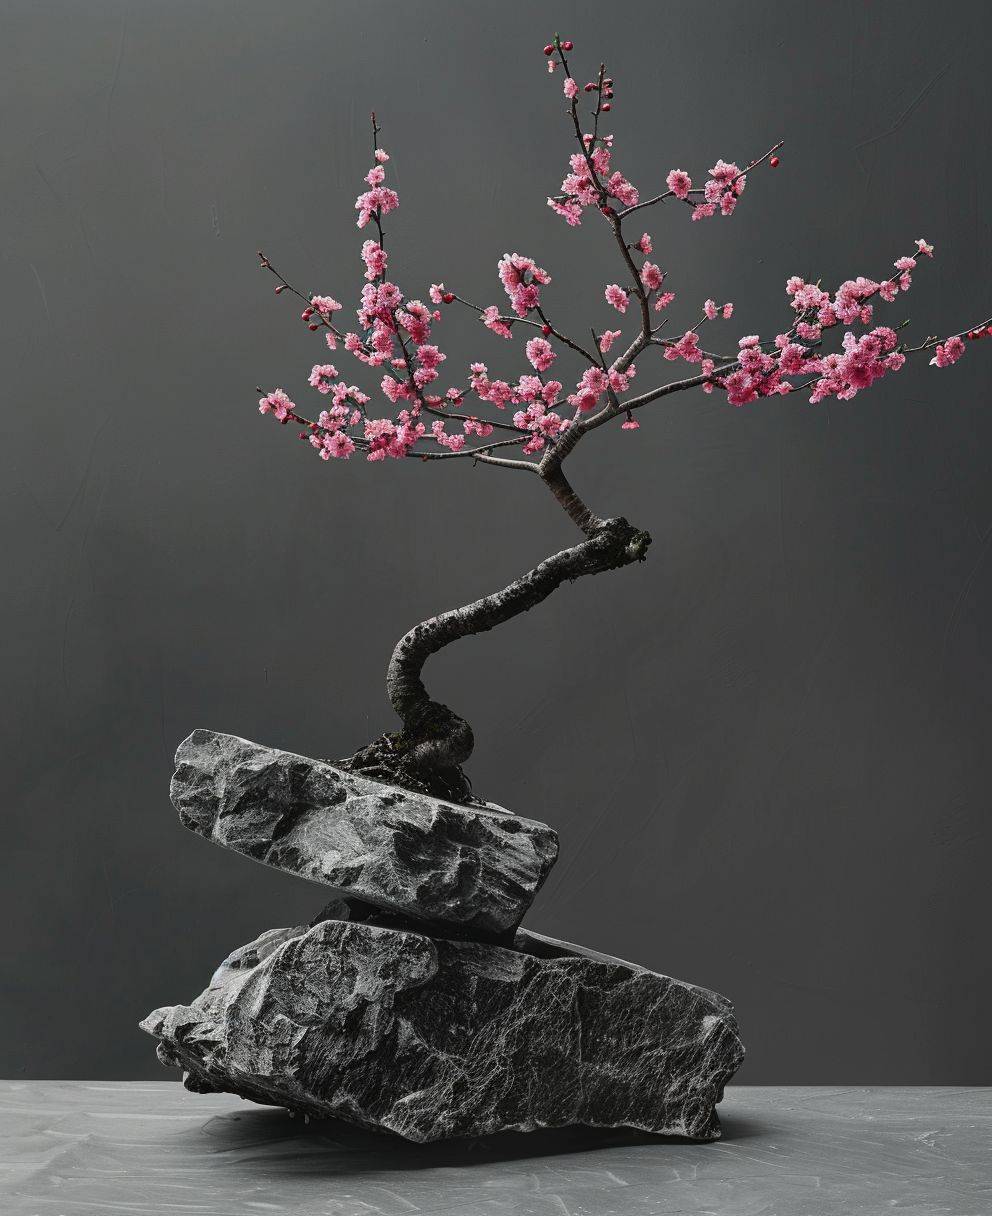 Hyper realistic photography, black and white photography, stones balancing in a symmetrical way, with a pink cherry tree bonsai.